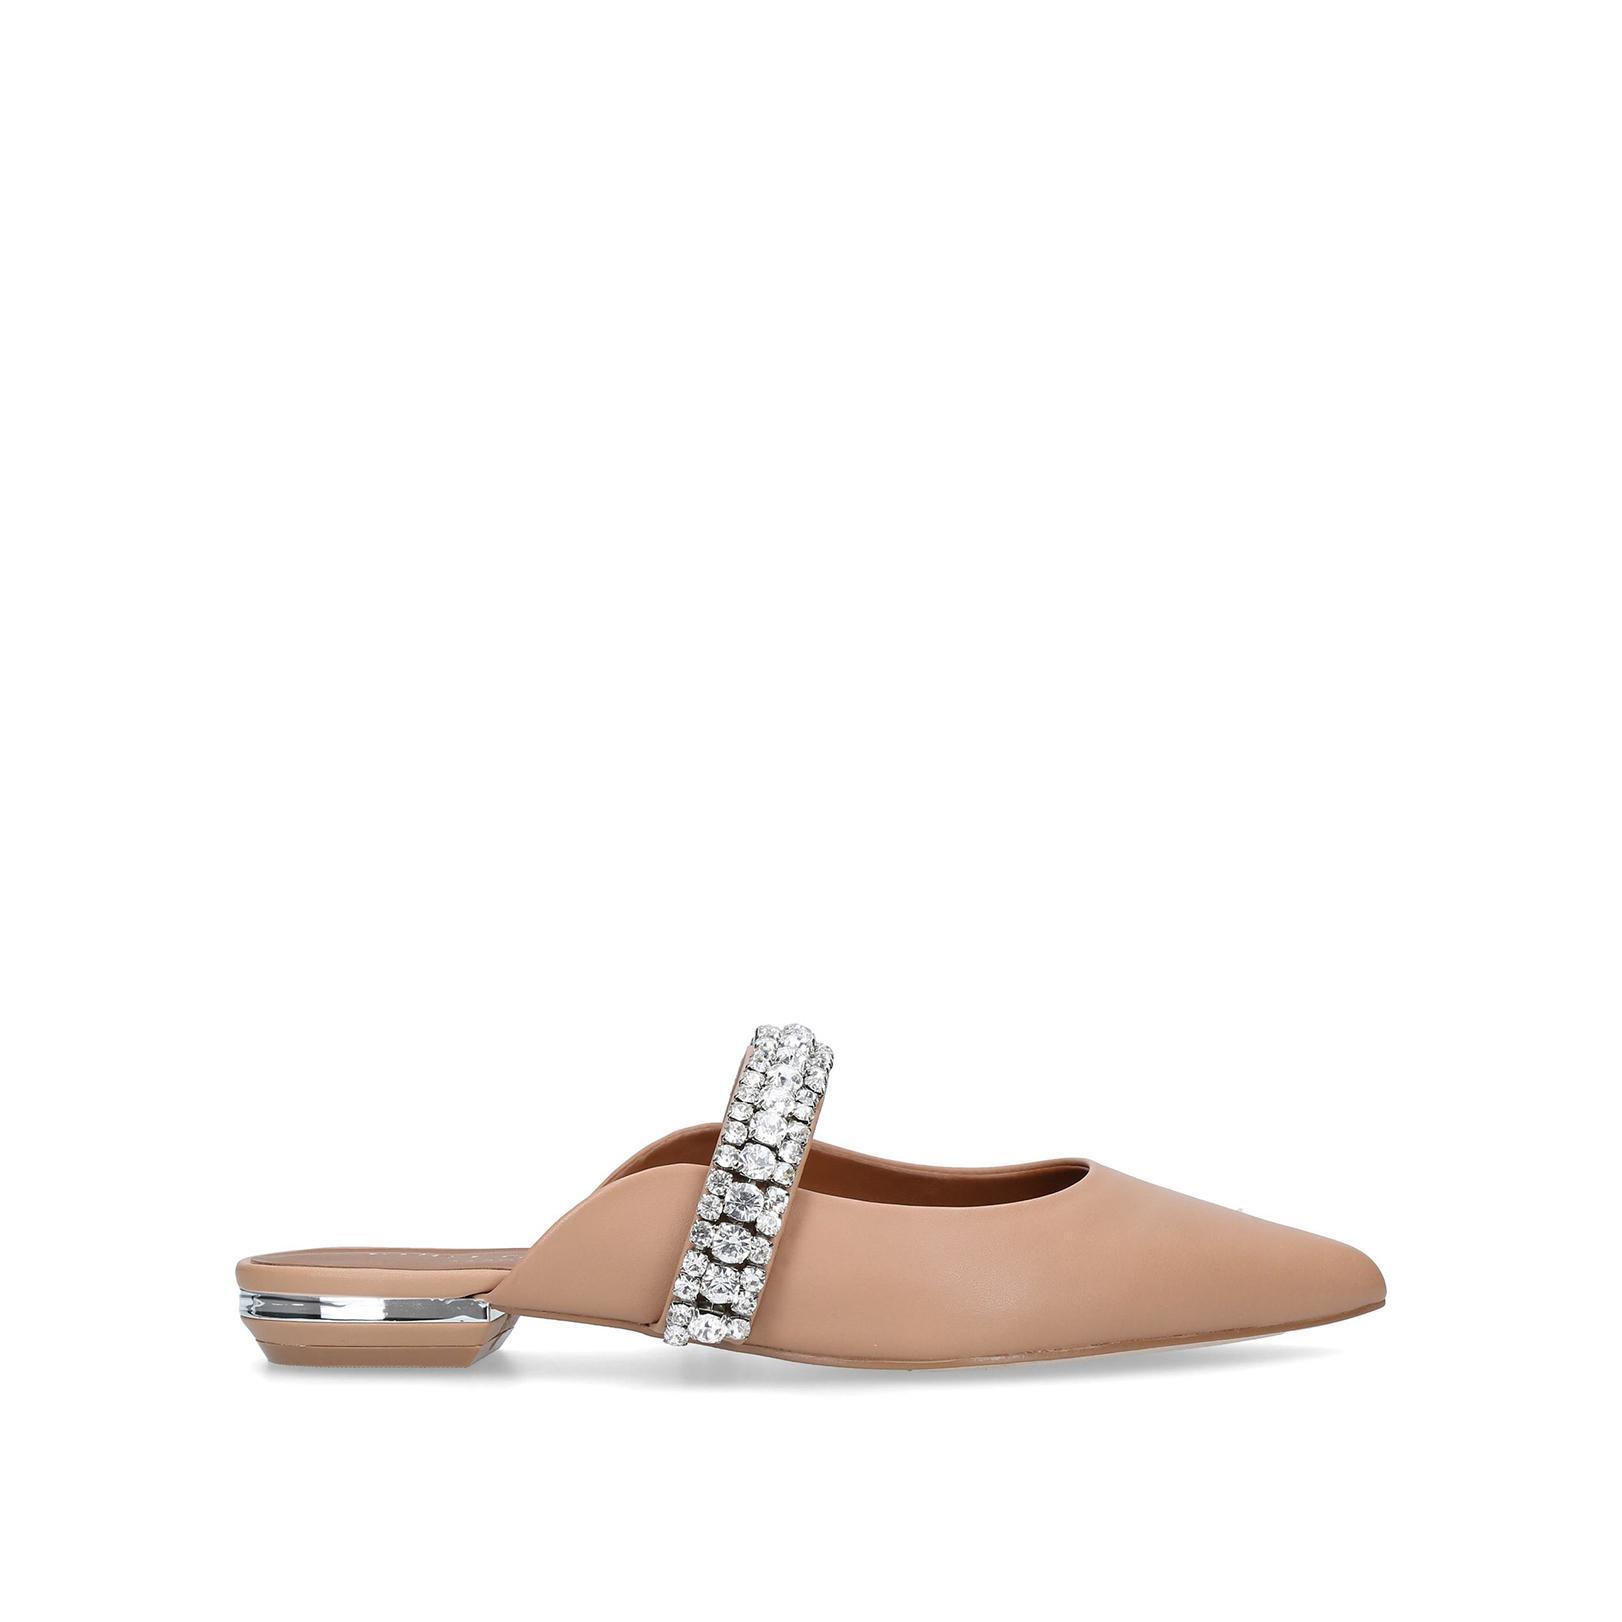 PRINCELY Camel Leather Crystal Strap Flat Mules by KURT GEIGER LONDON